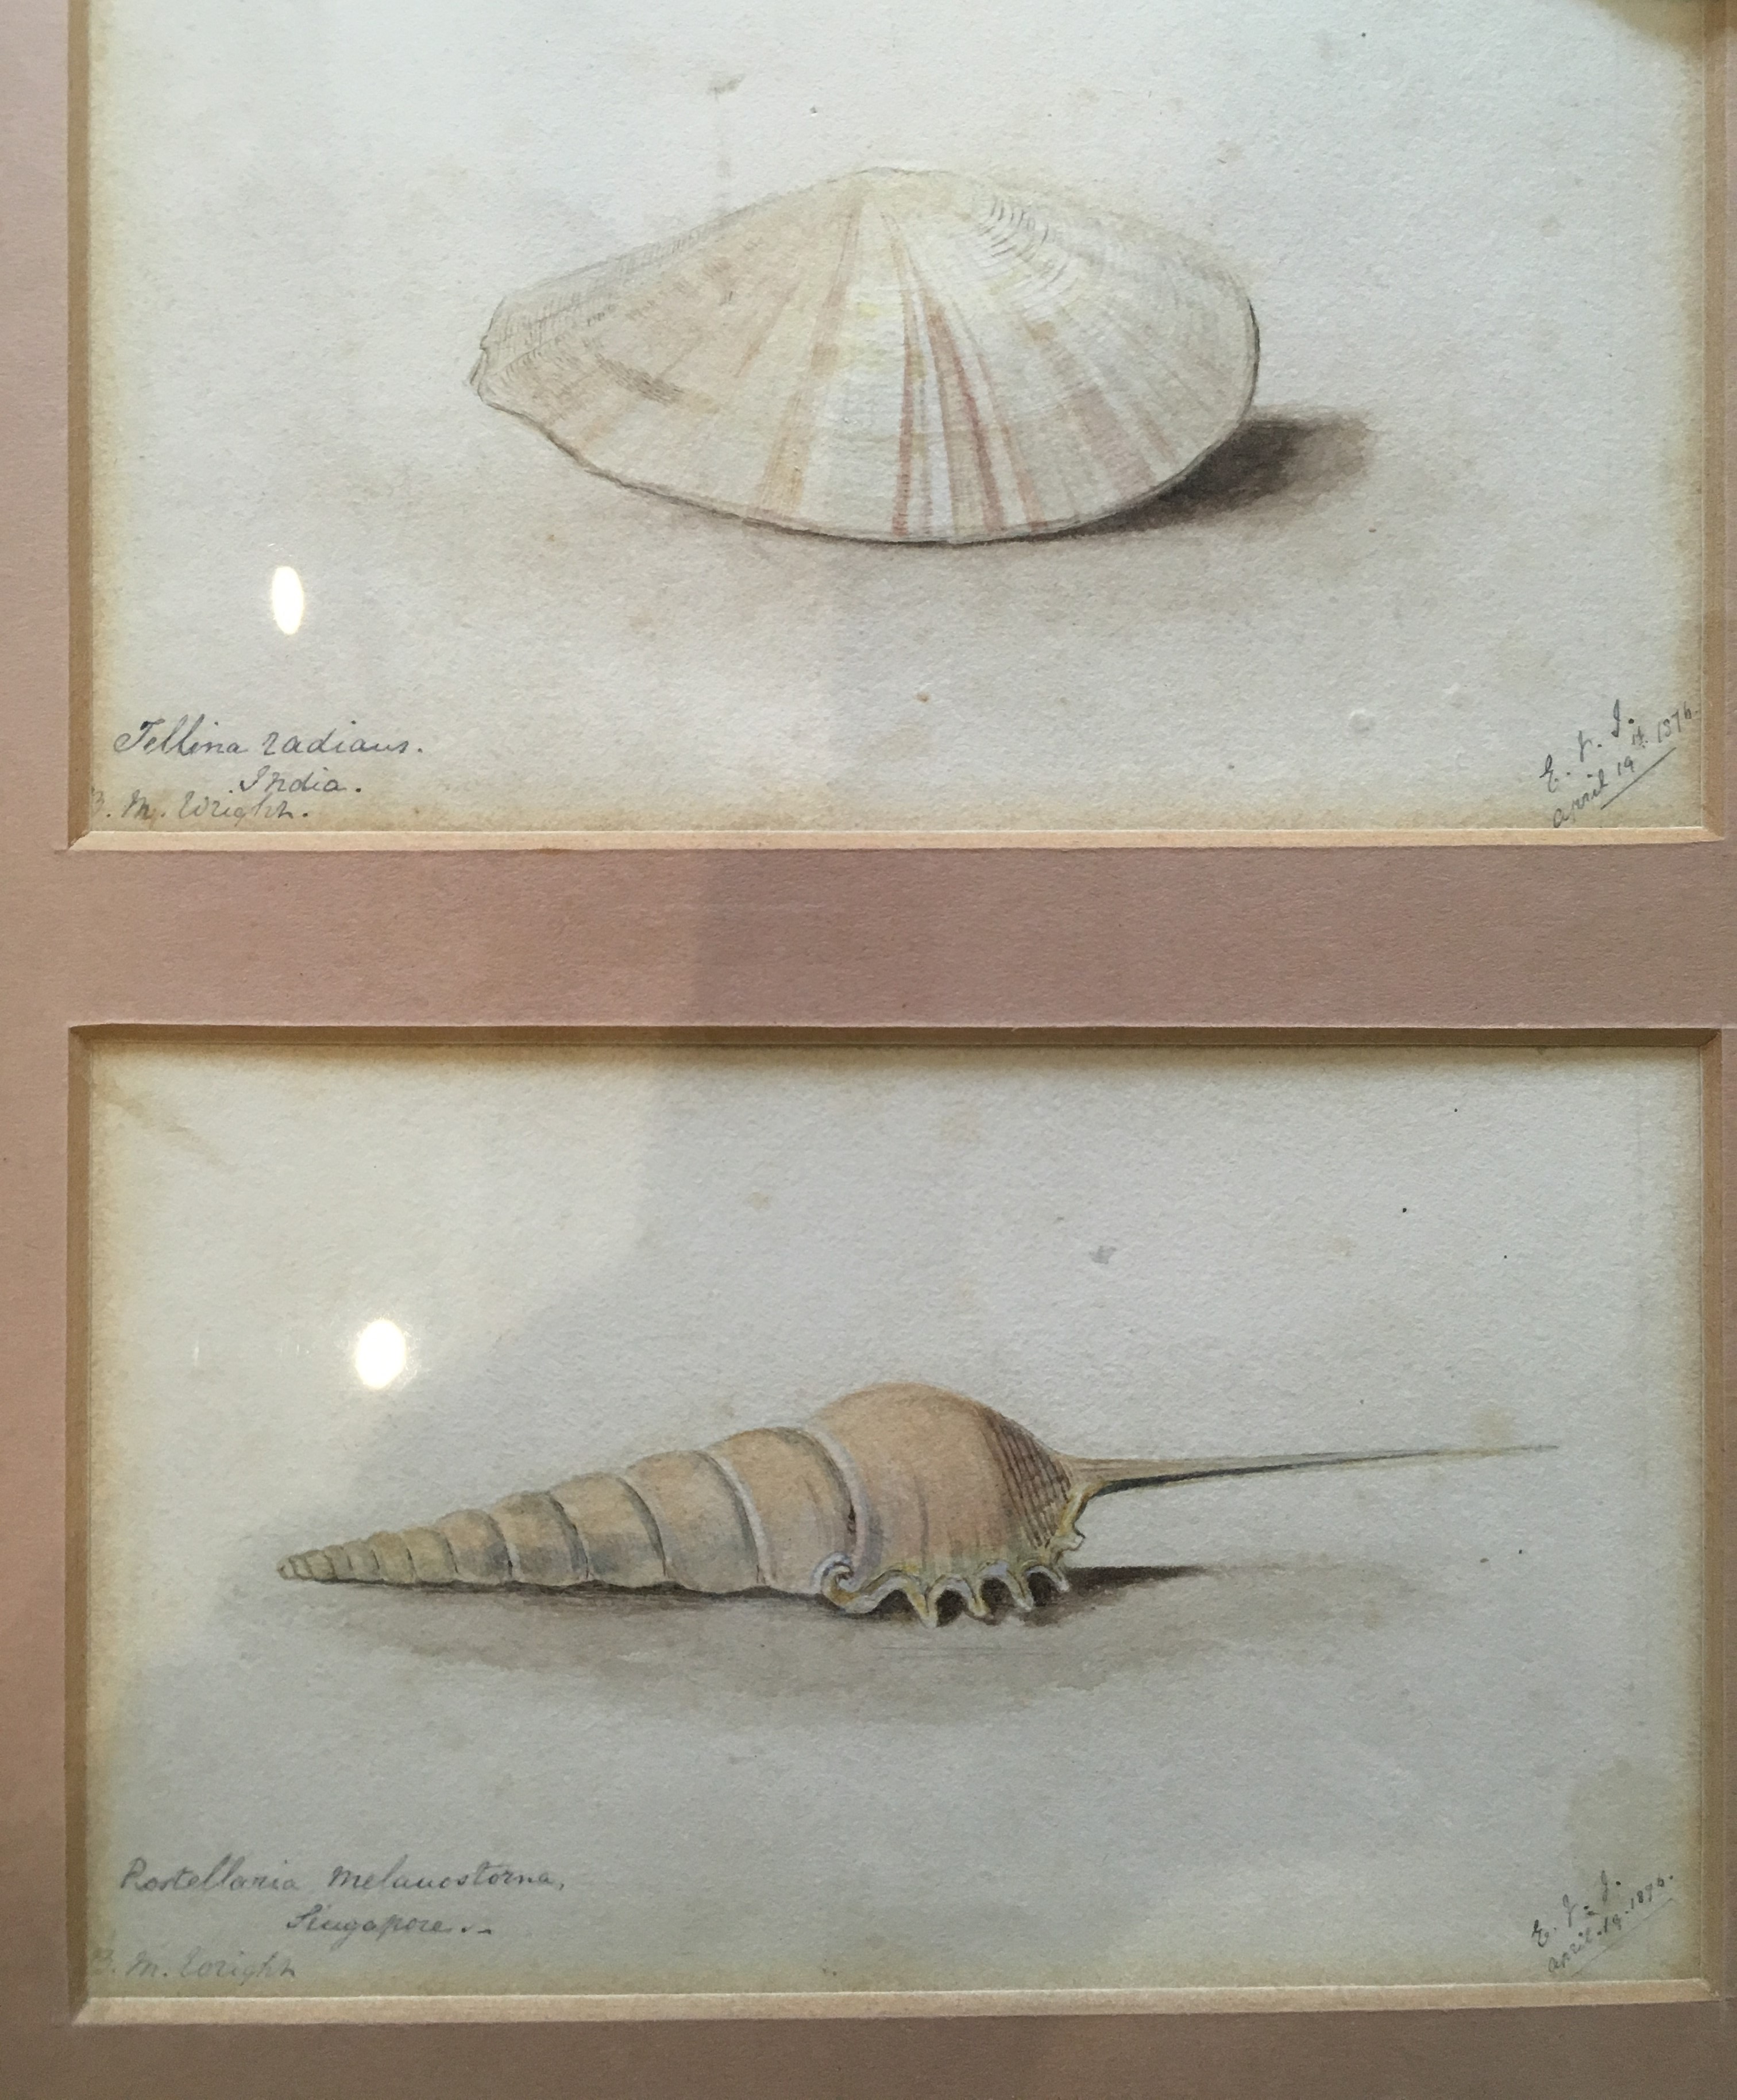 ERNEST HENRY GRISET (1843-1907) A STUDY OF MR. BRYCE MCMURDO WRIGHT'S SHELLS both initialled E.H.S., - Image 2 of 3